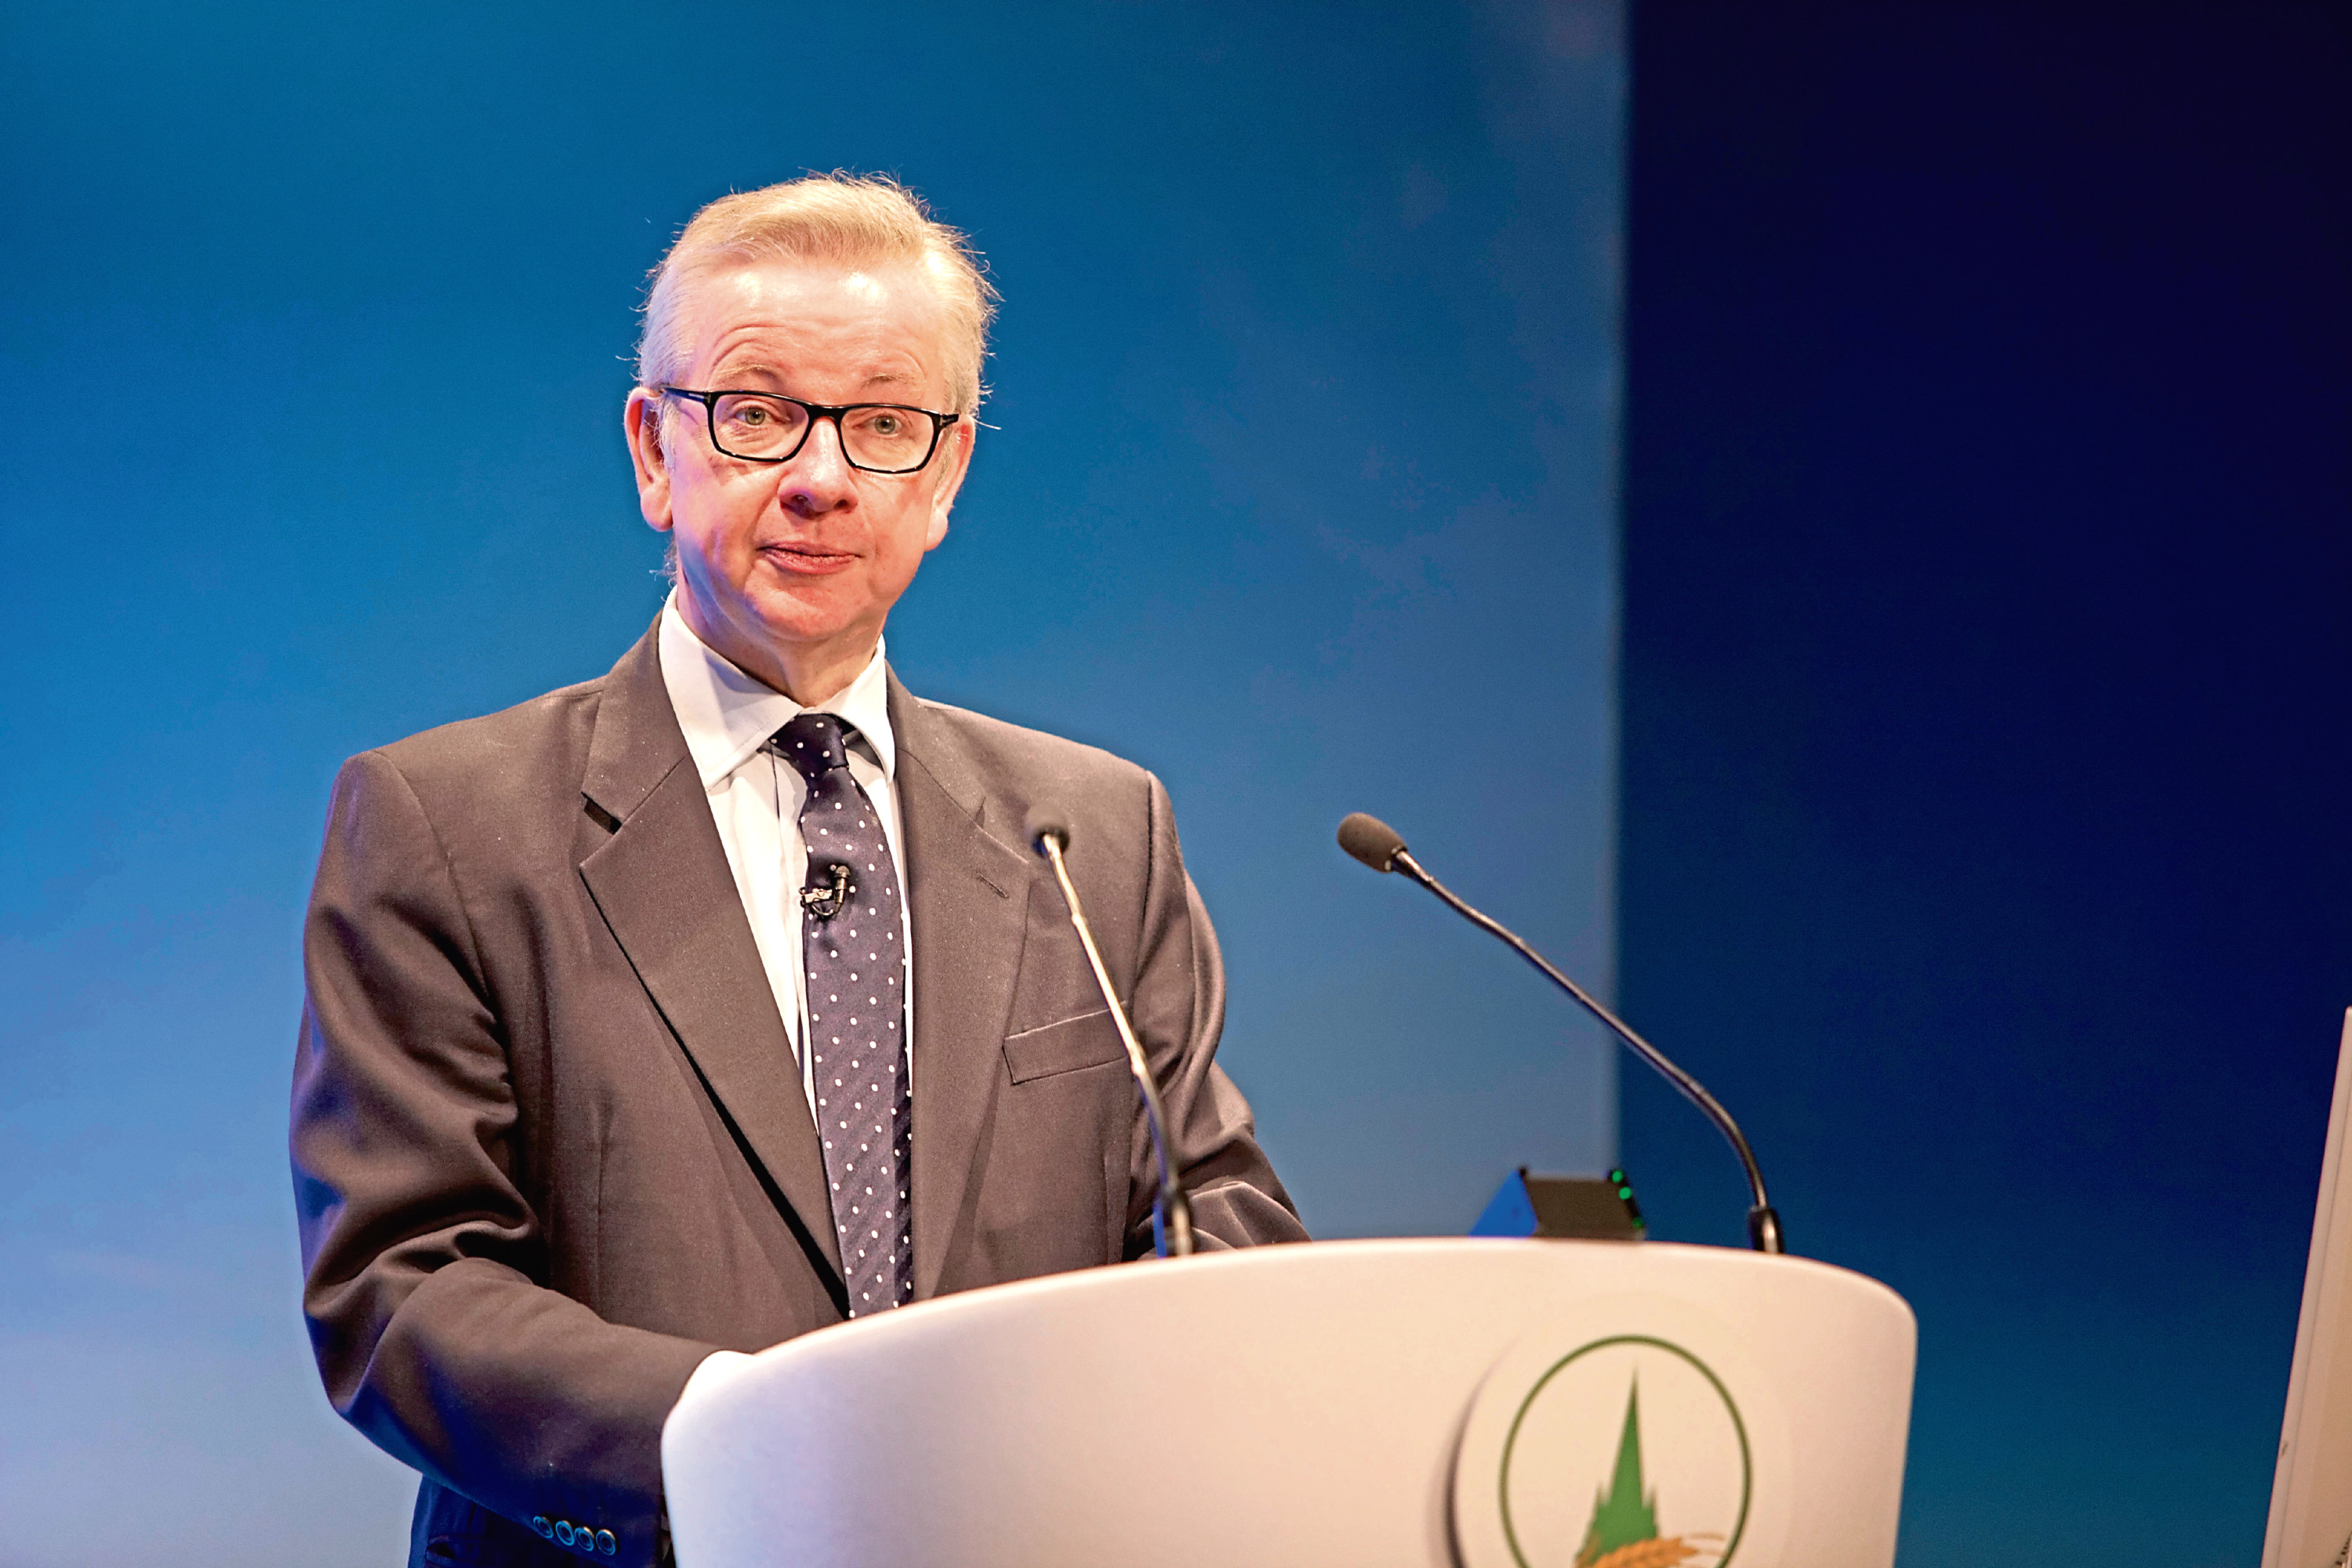 Defra Secretary of State Michael Gove at the Oxford Farming Conference.